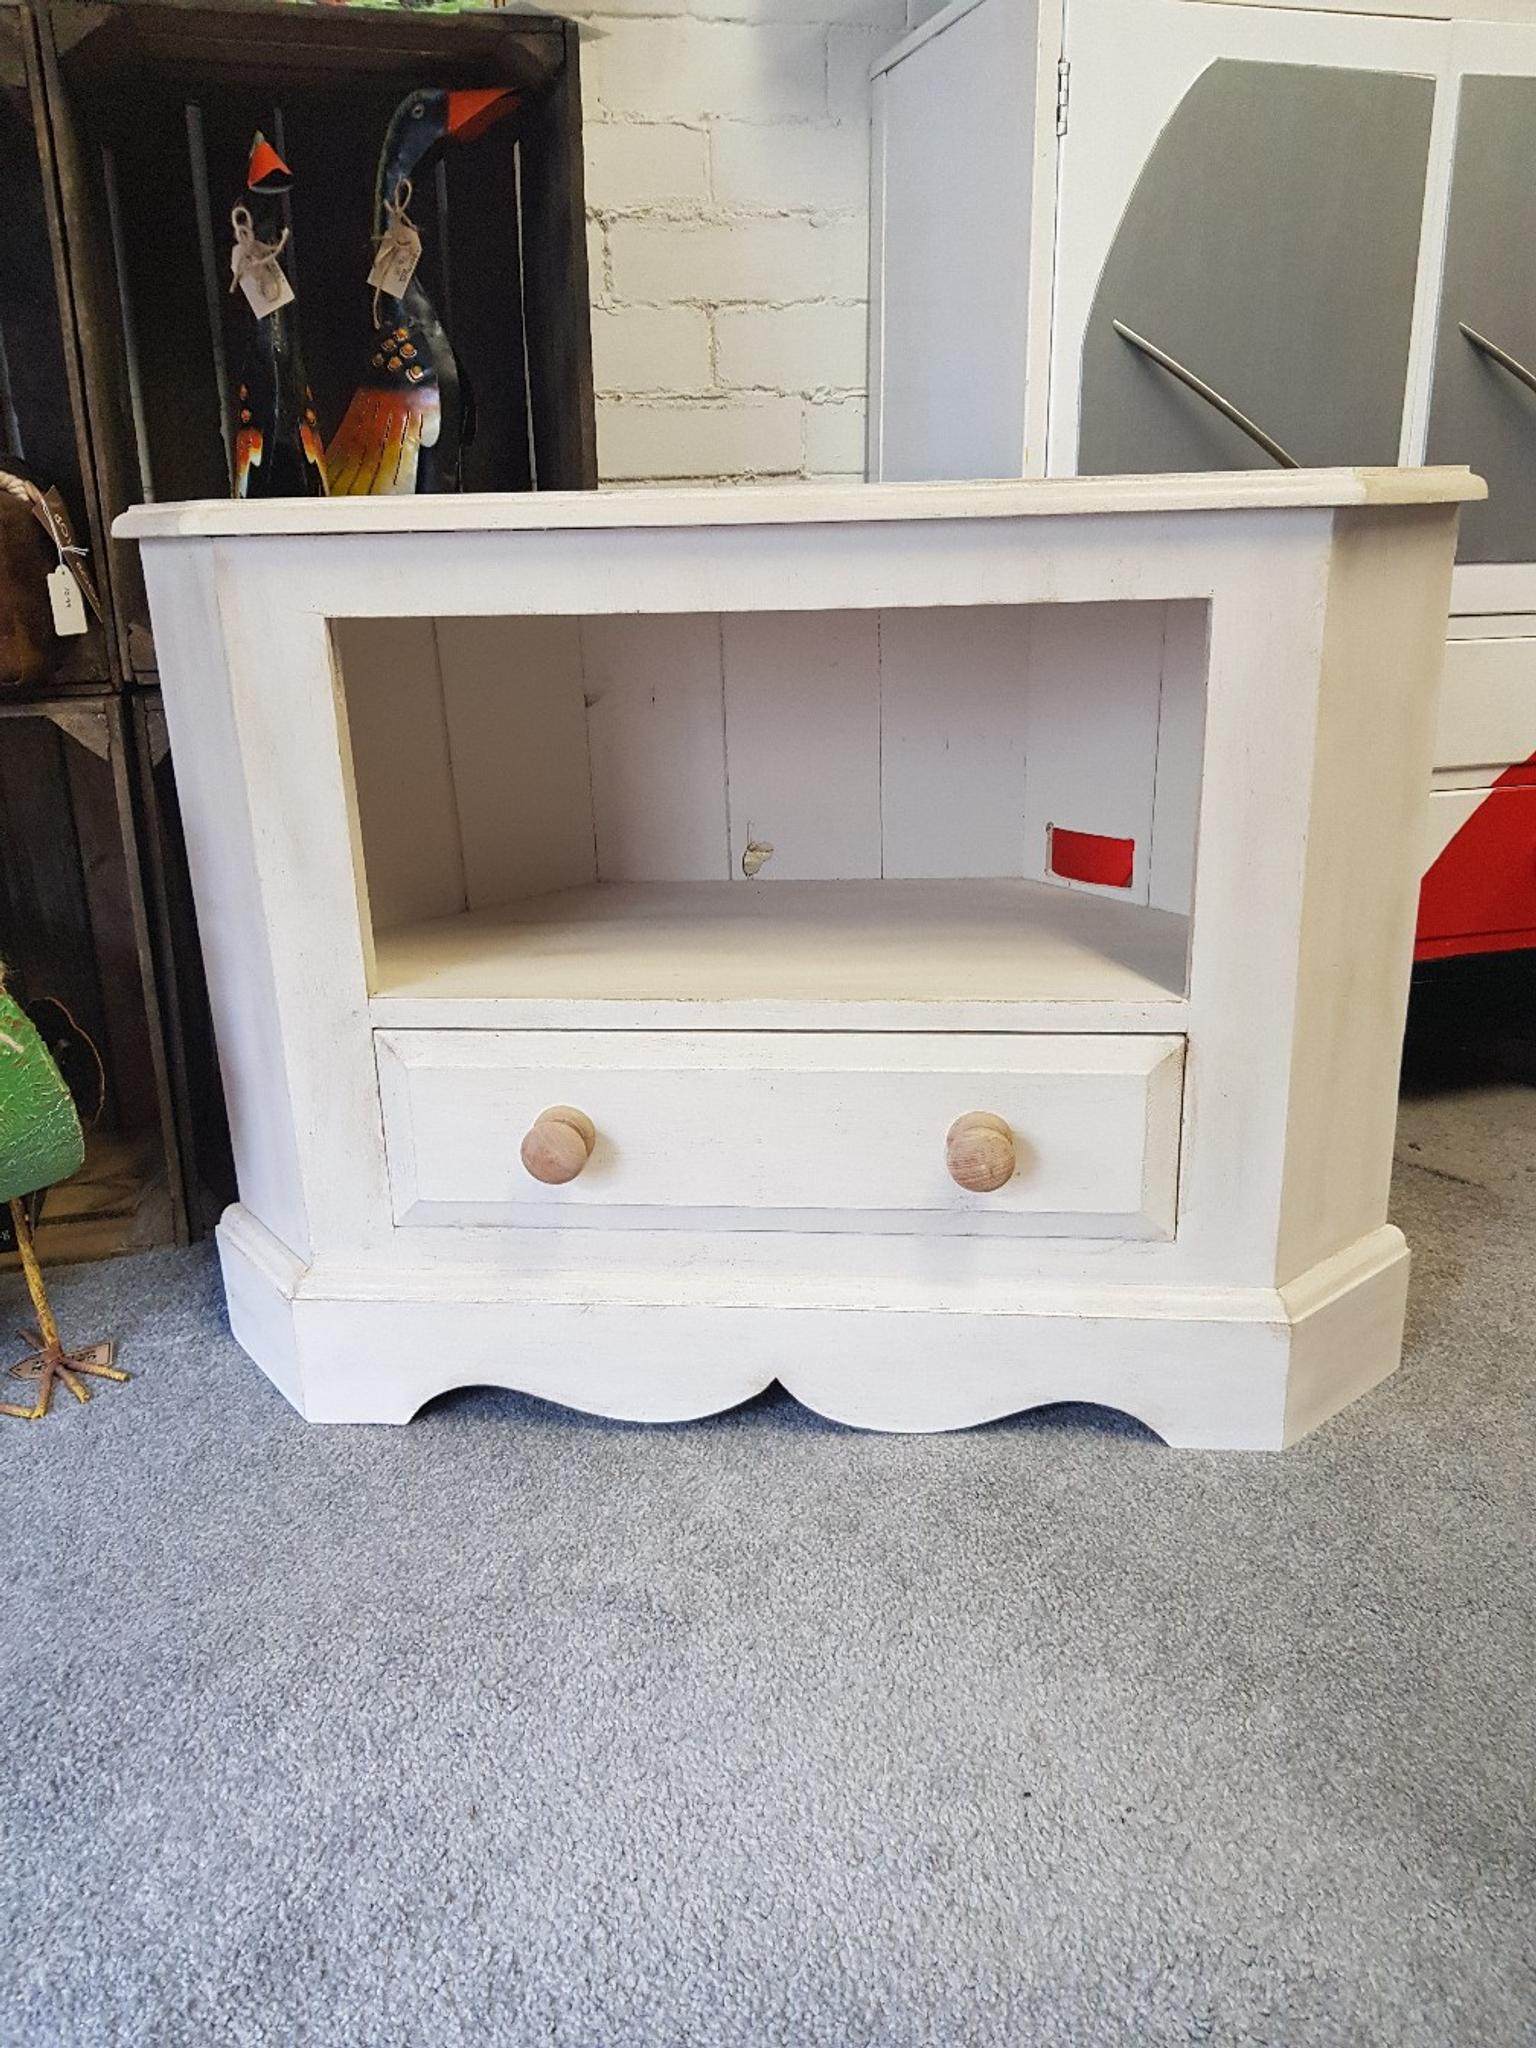 Shabby Chic Corner Tv Unit In Ws10 Sandwell For 40 00 For Sale